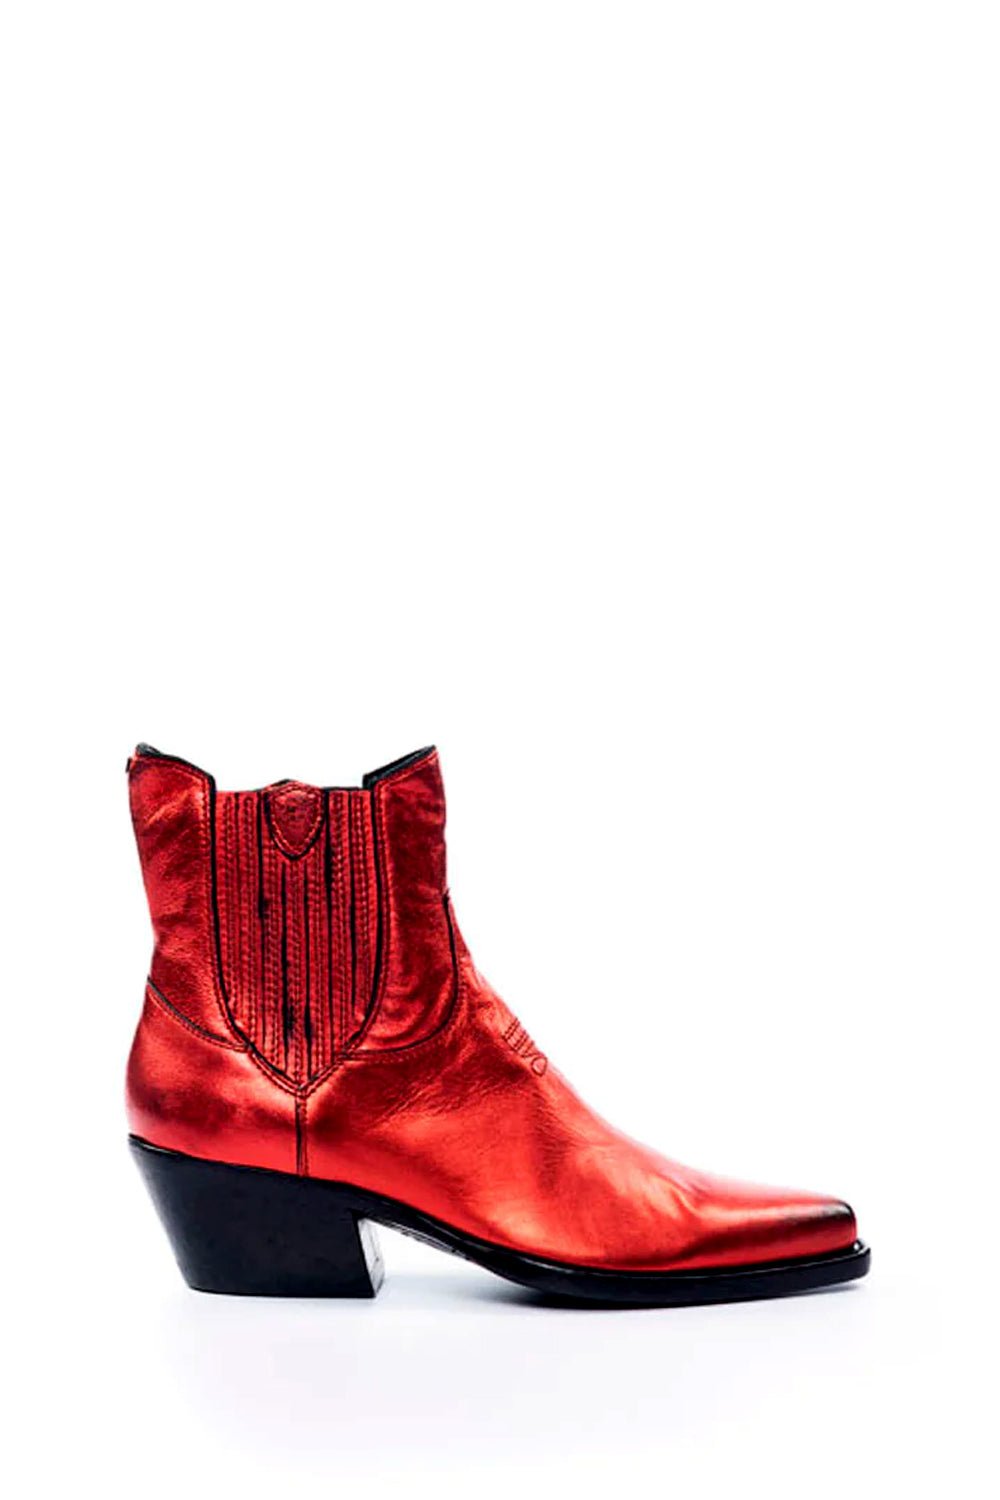 LOW CHELSEA BOOT Red metallic leather 'Texas' boots. Squared metal tip. Elastic closure on the sides. Heel height: 5 cm. Made in Italy. HTC LOS ANGELES